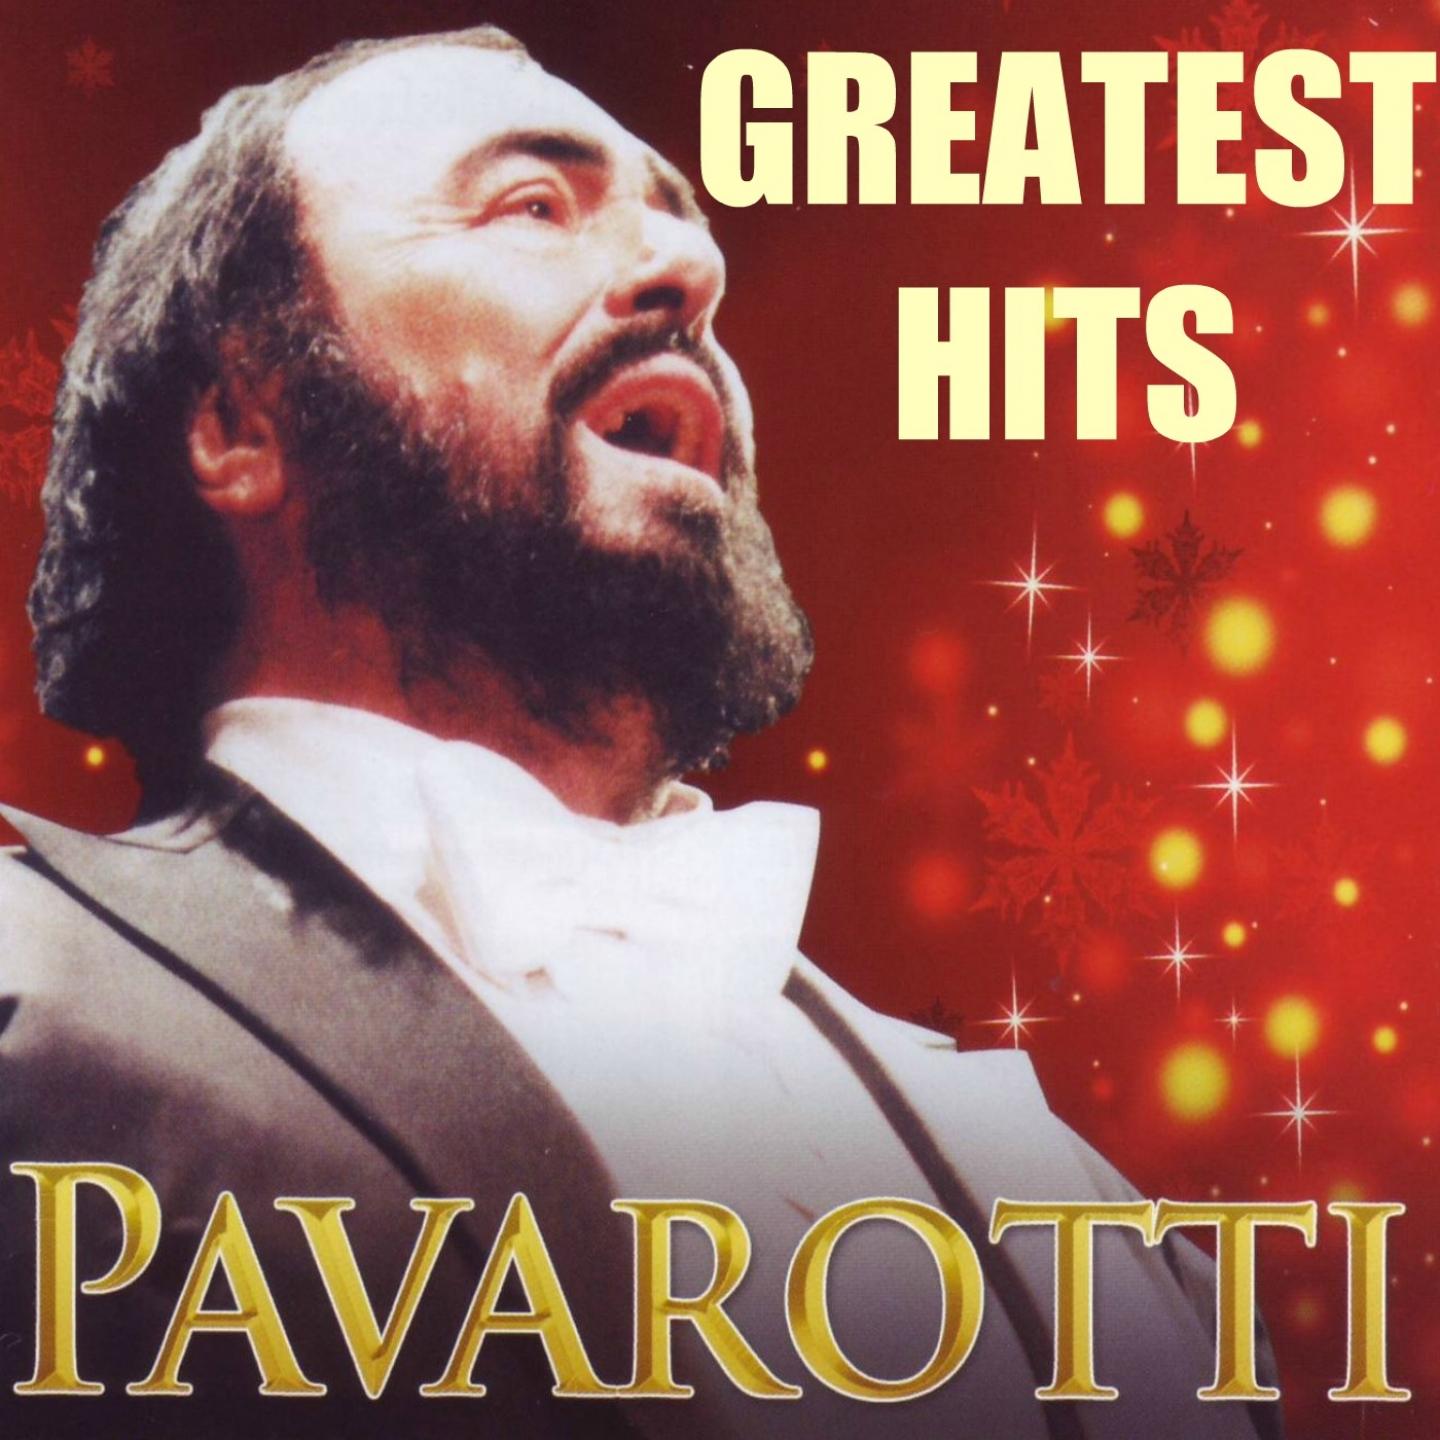 The Greatest Opera Arias By Pavarotti (Greatest Hits)